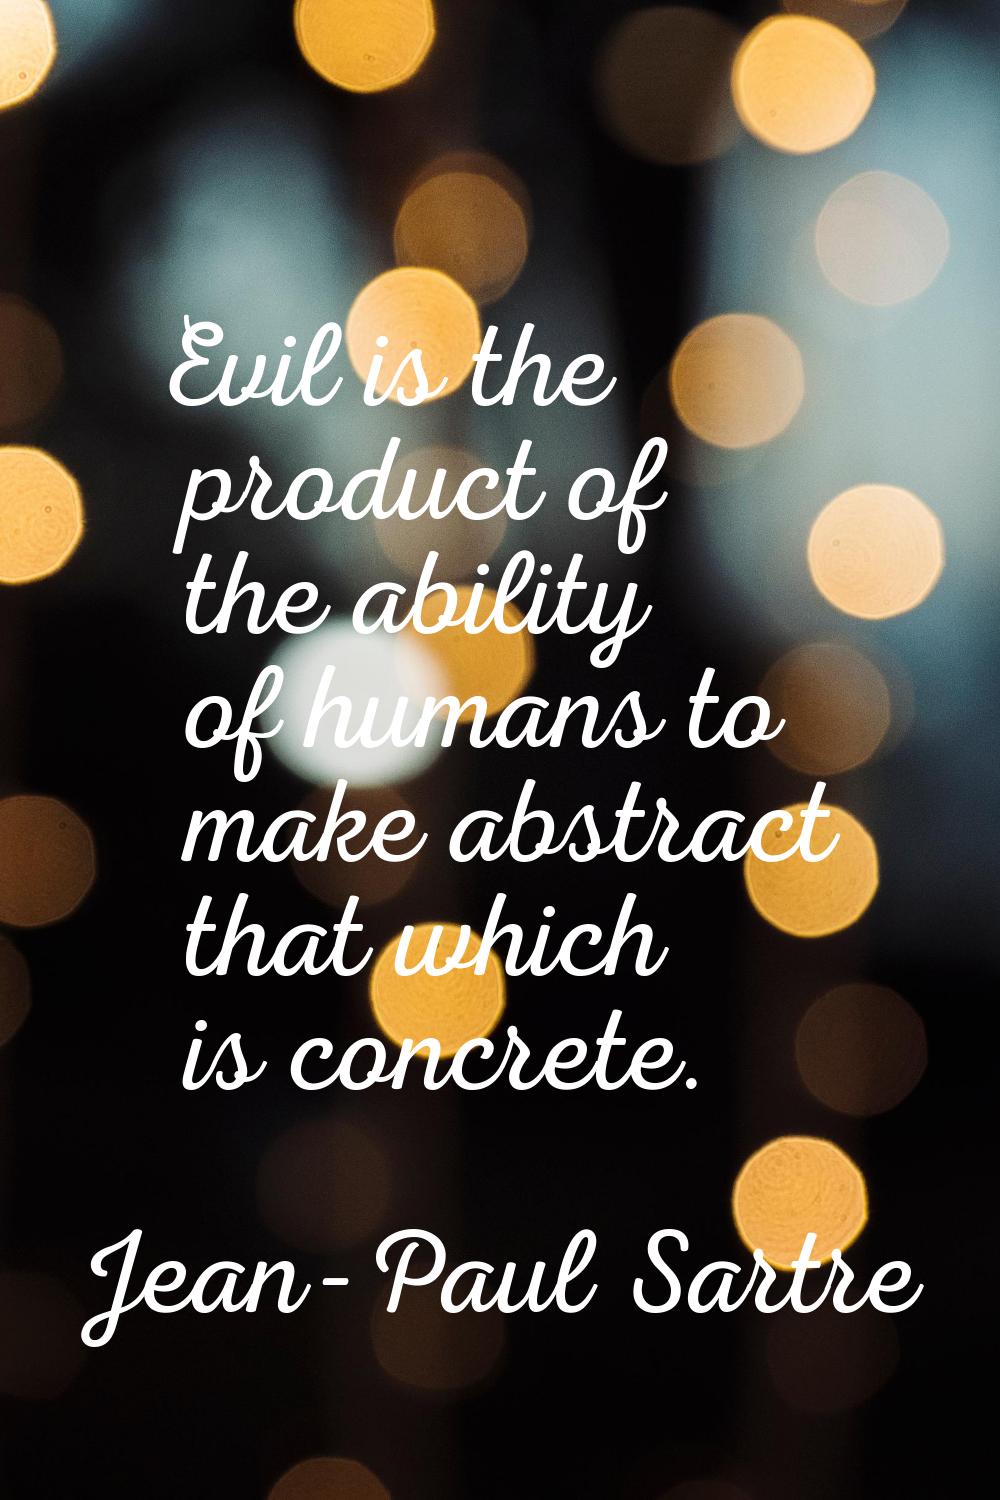 Evil is the product of the ability of humans to make abstract that which is concrete.